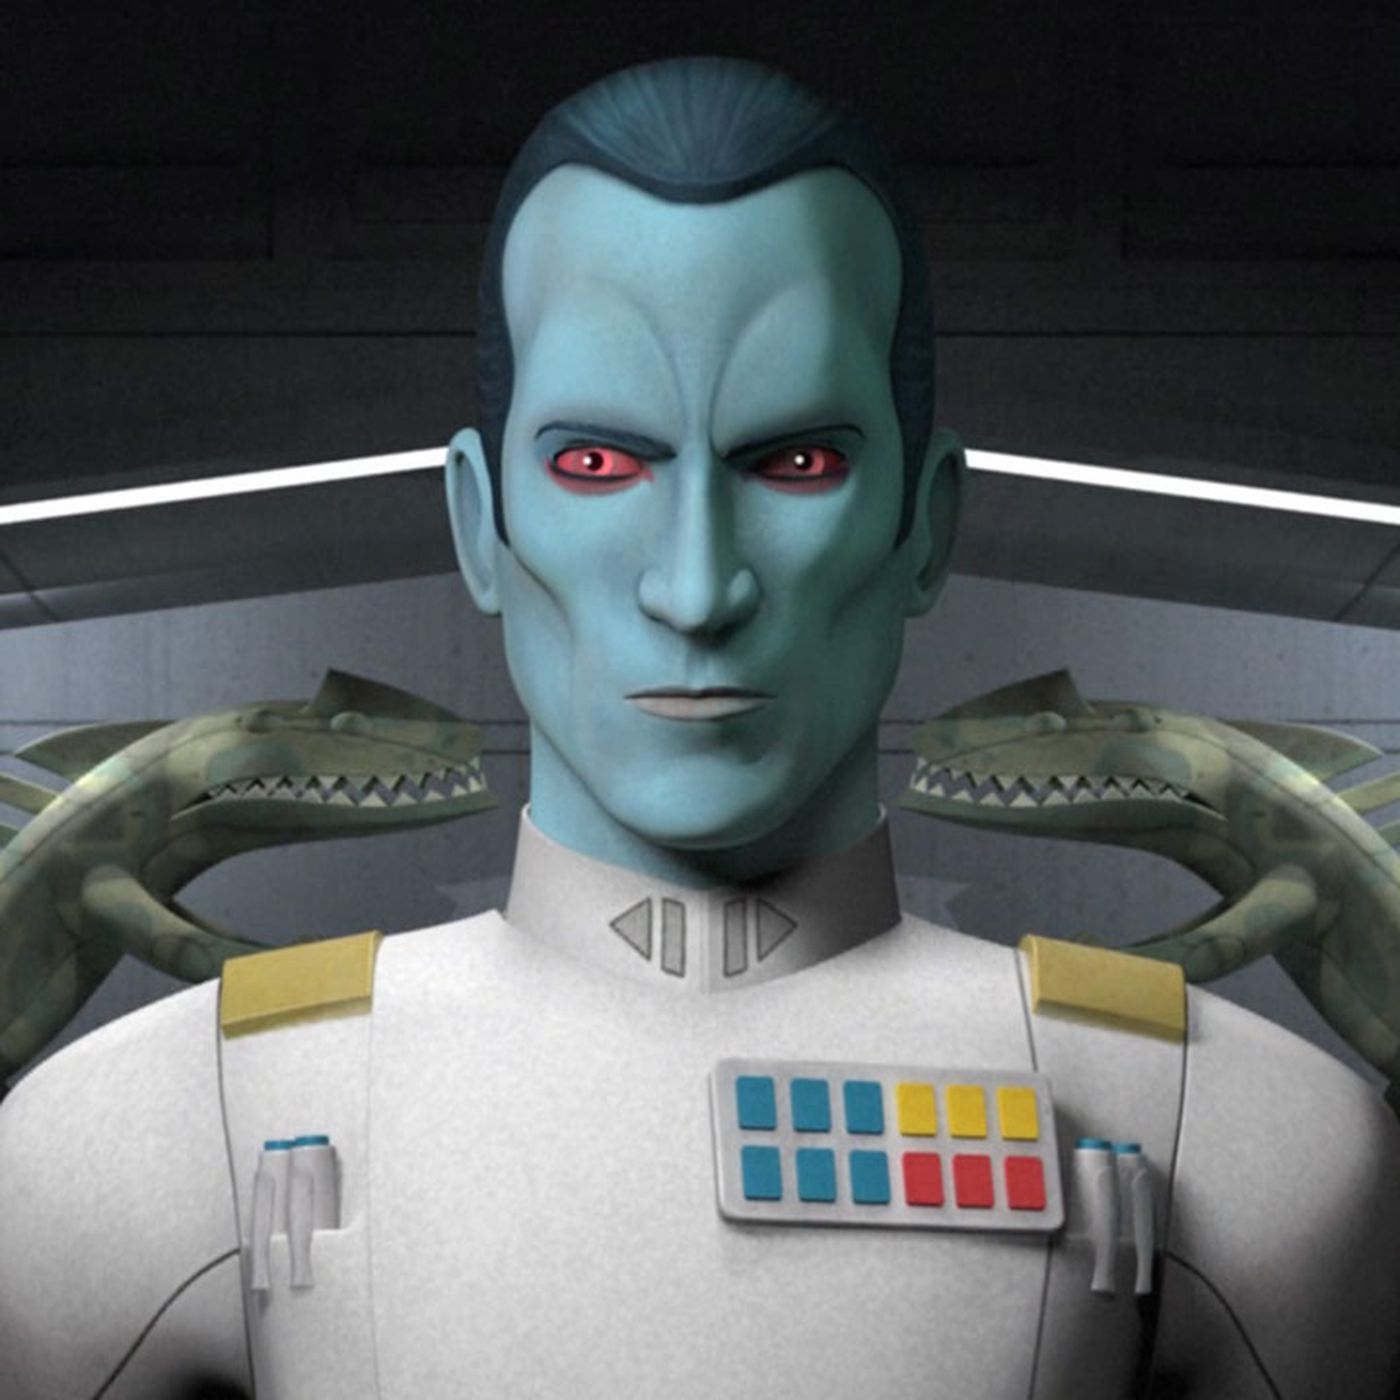 Now Dave Filoni confirms that Thrawn is the main villain of his Star Wars movie!